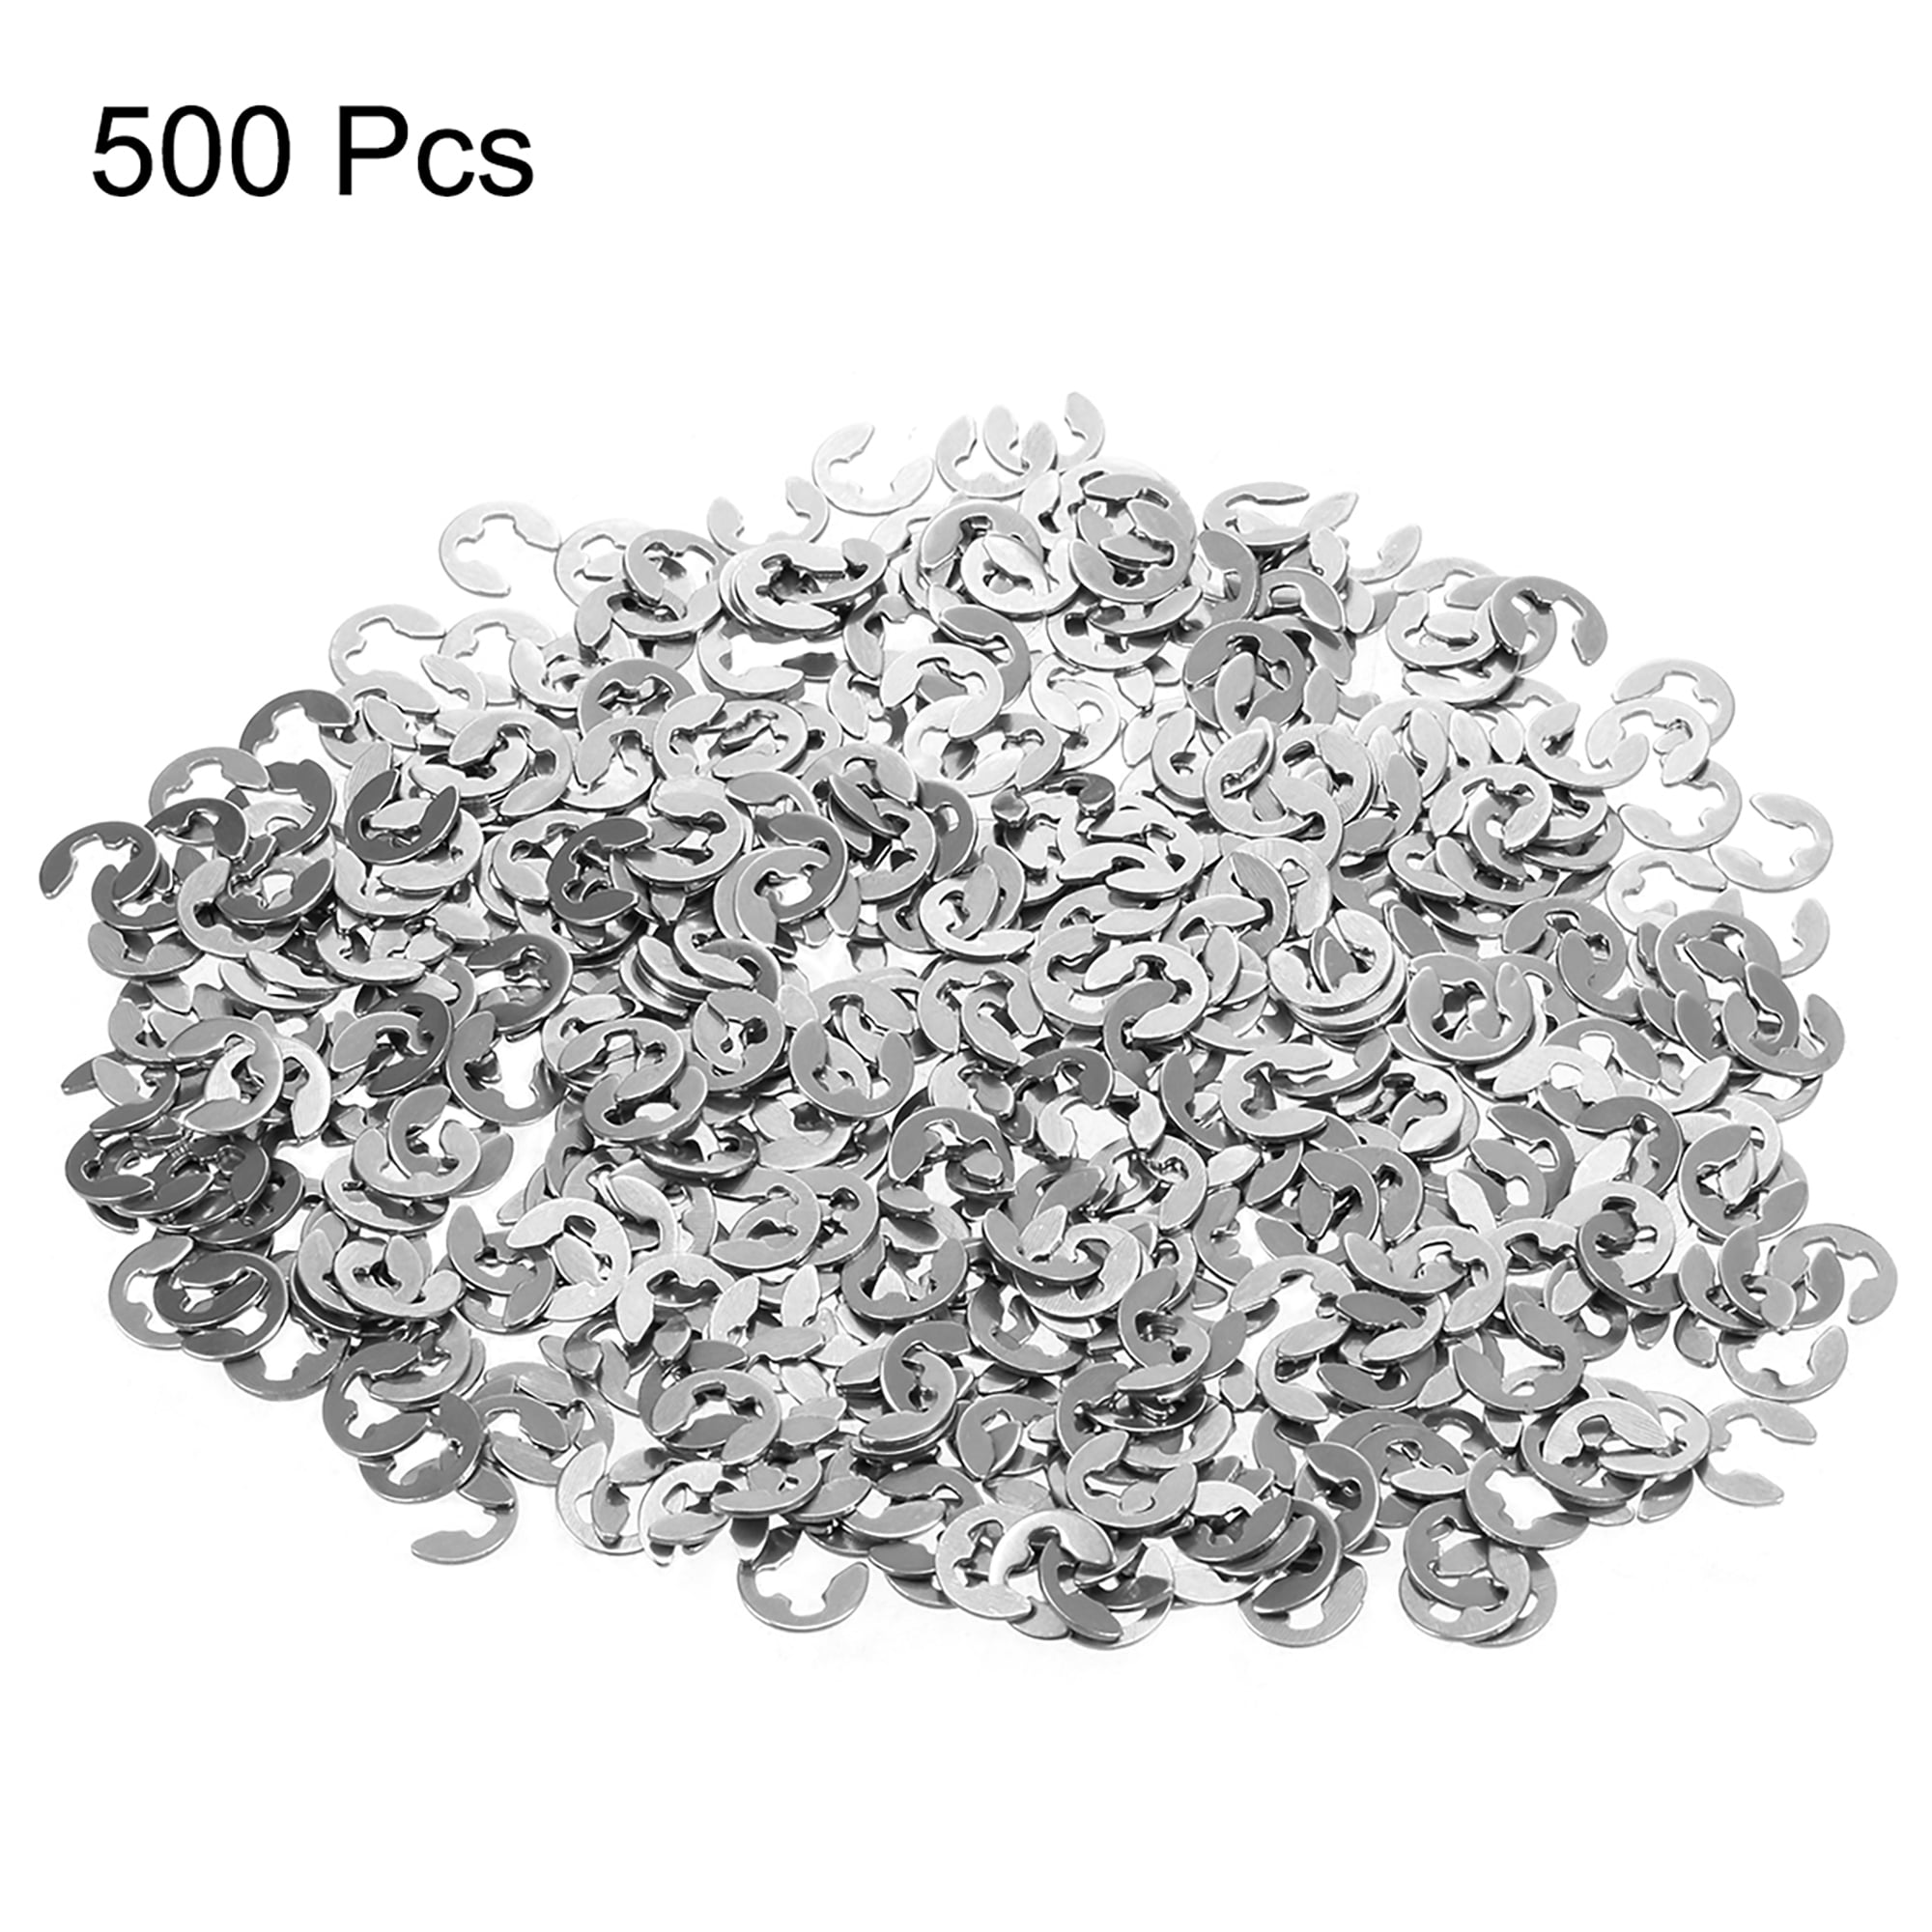 XFentech 100pcs Clips Retaining Snap C-Type Internal Circlip 304 Stainless Steel Opening Ring Circlip Assorted 24 Sizes,Size 13mm,Silver